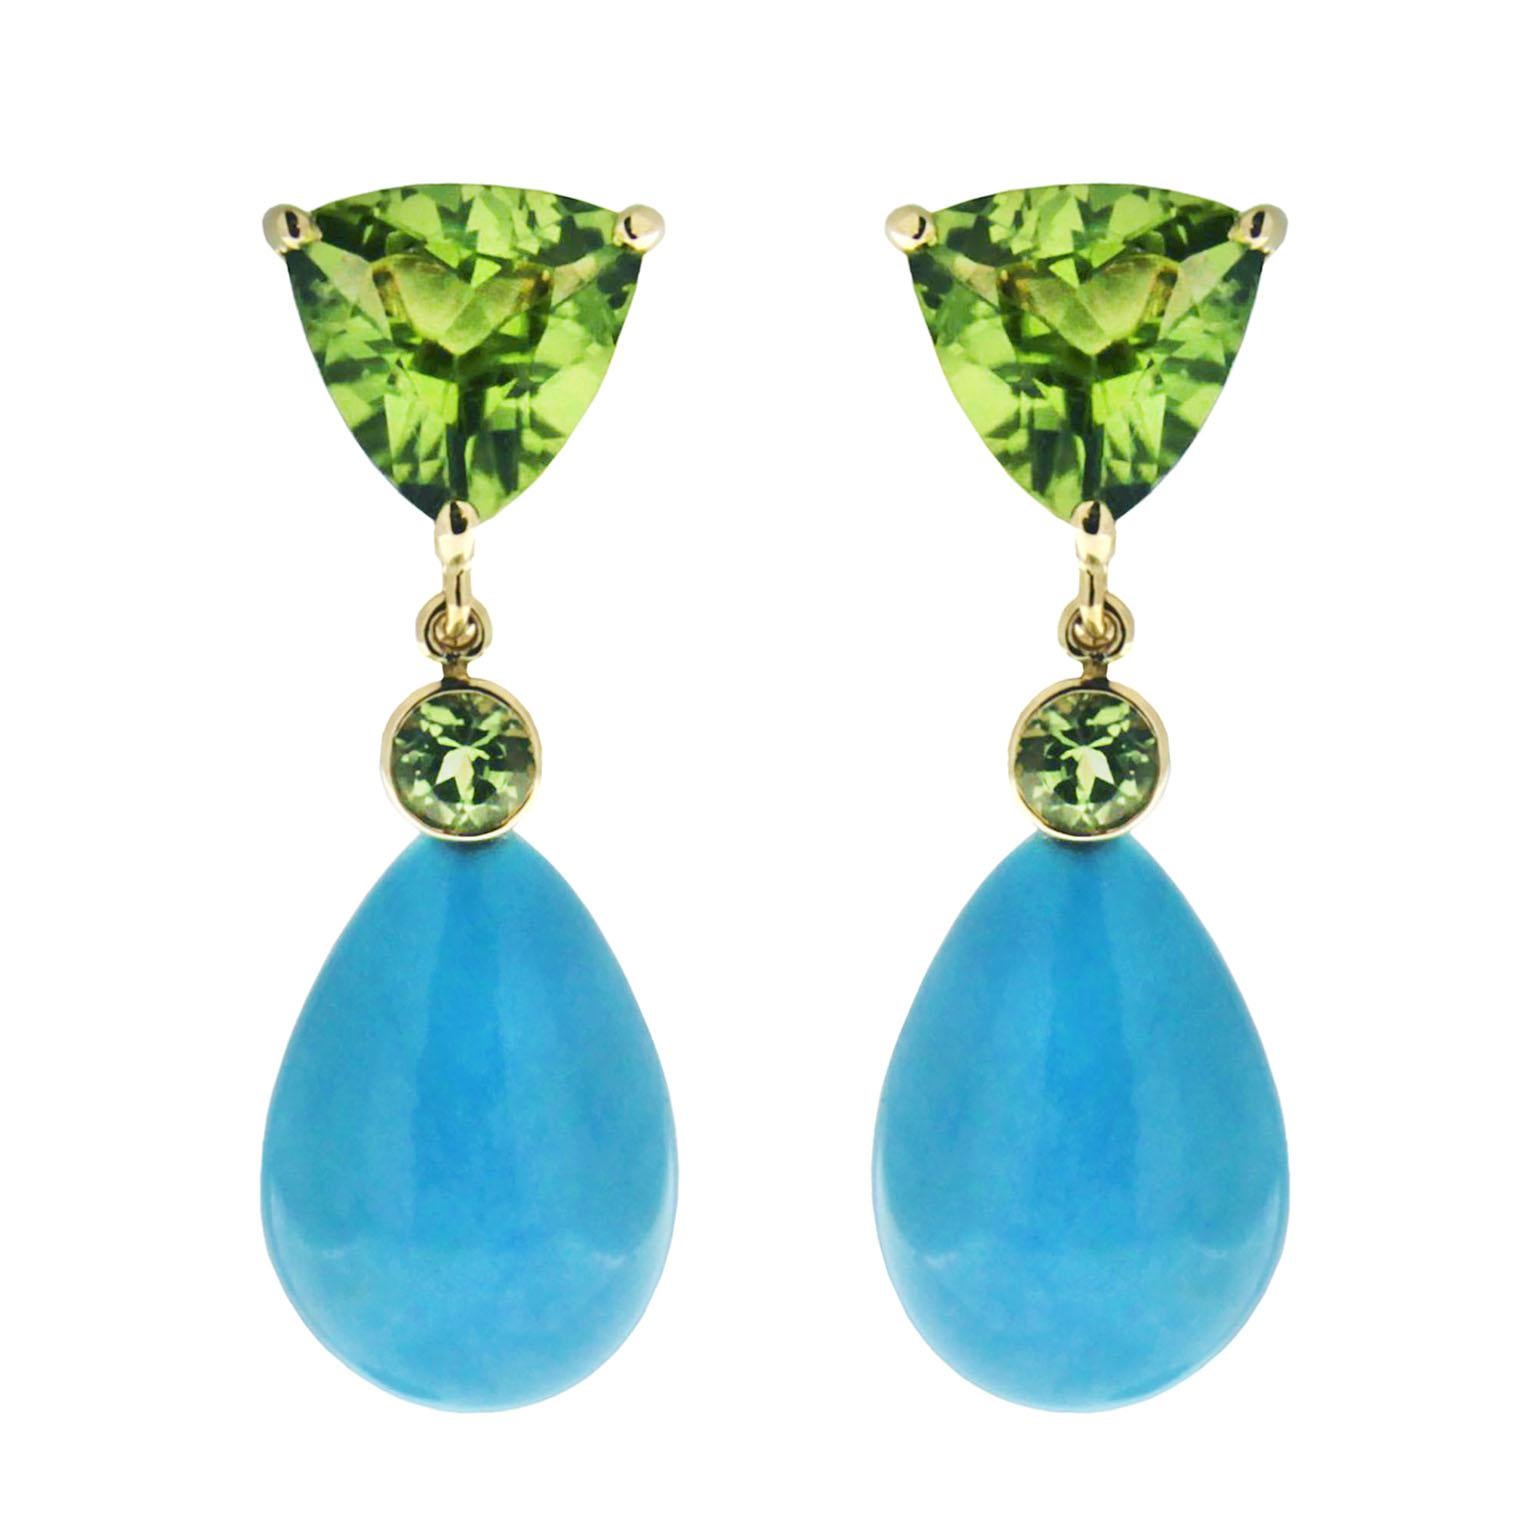 Valentin Magro Peridot and Turquoise Drop Earrings